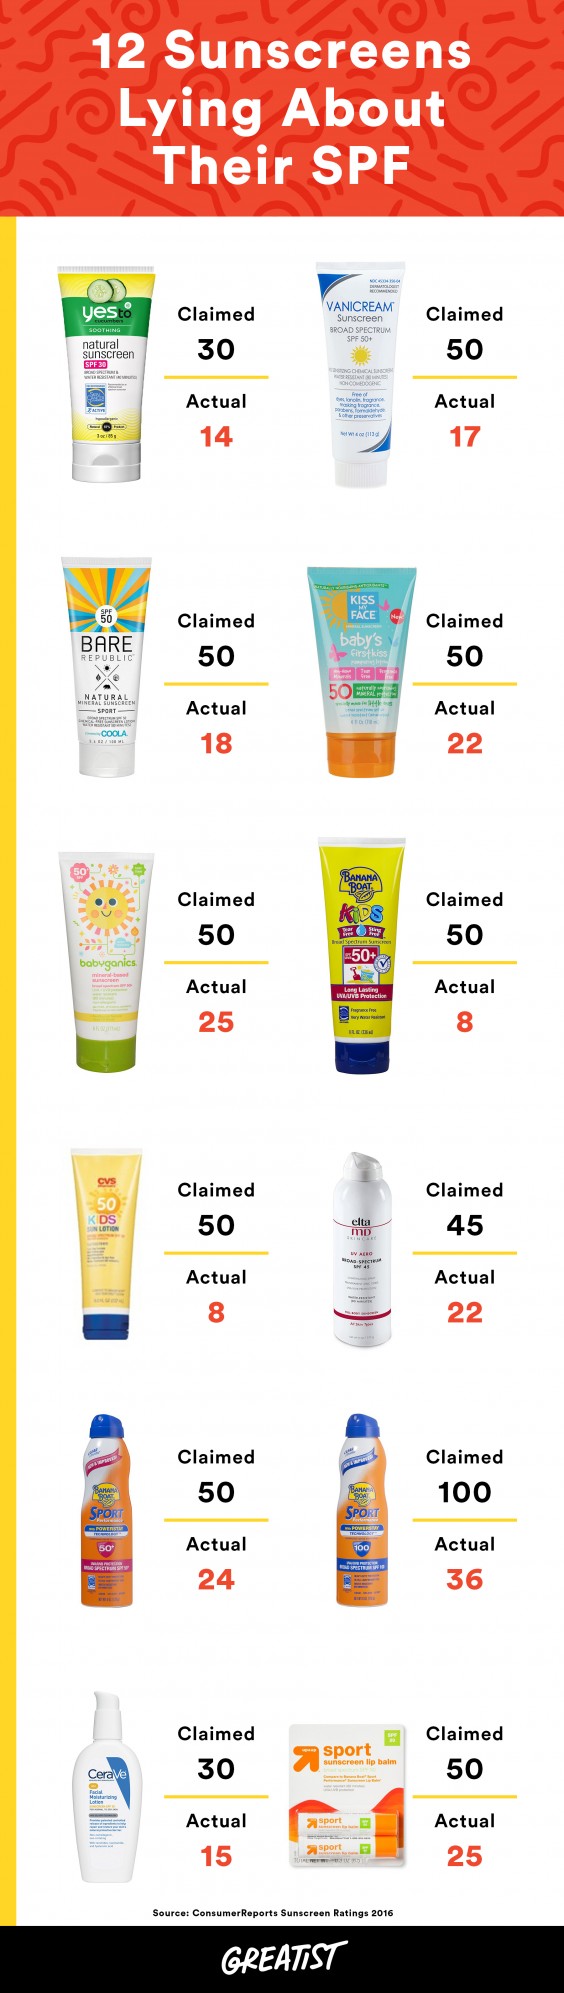 Sunscreens Lying About SPF